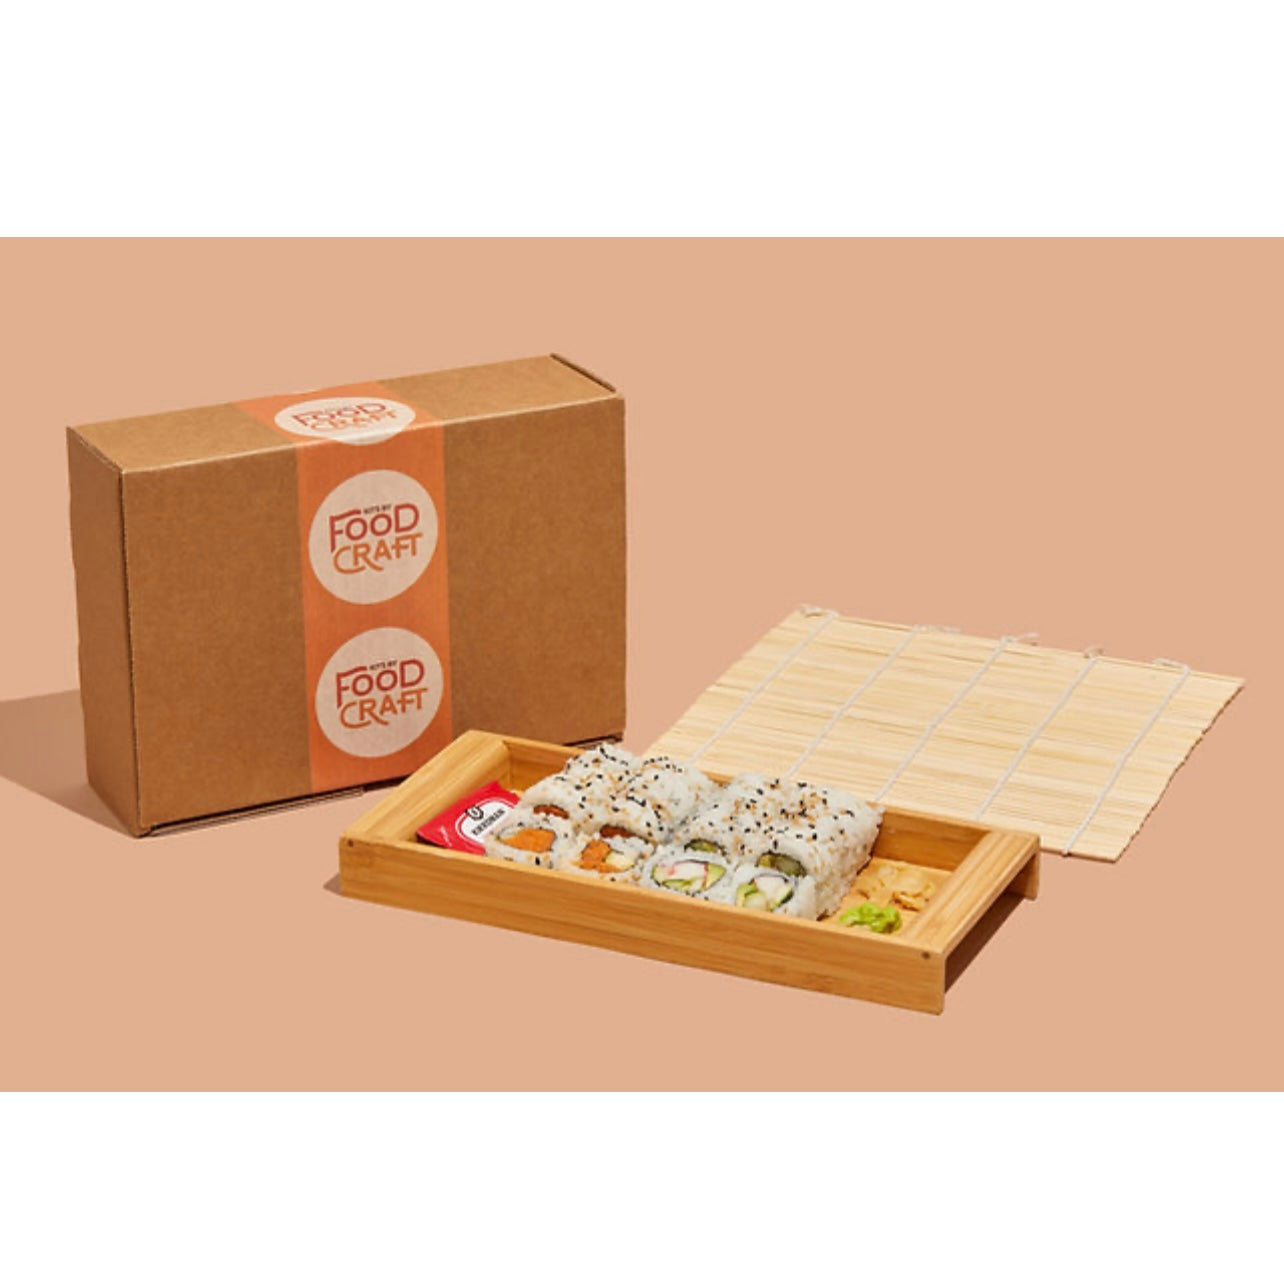 http://www.sarapnow.com/cdn/shop/products/kits-by-food-craft-food-beverage-all-inclusive-shiitake-sushi-making-kit-diy-kit-vegetarian-includes-miso-soup-10-rolls-spicy-mayo-all-inclusive-shiitake-sushi-making-kit-diy-kit-vege.jpg?v=1680887034